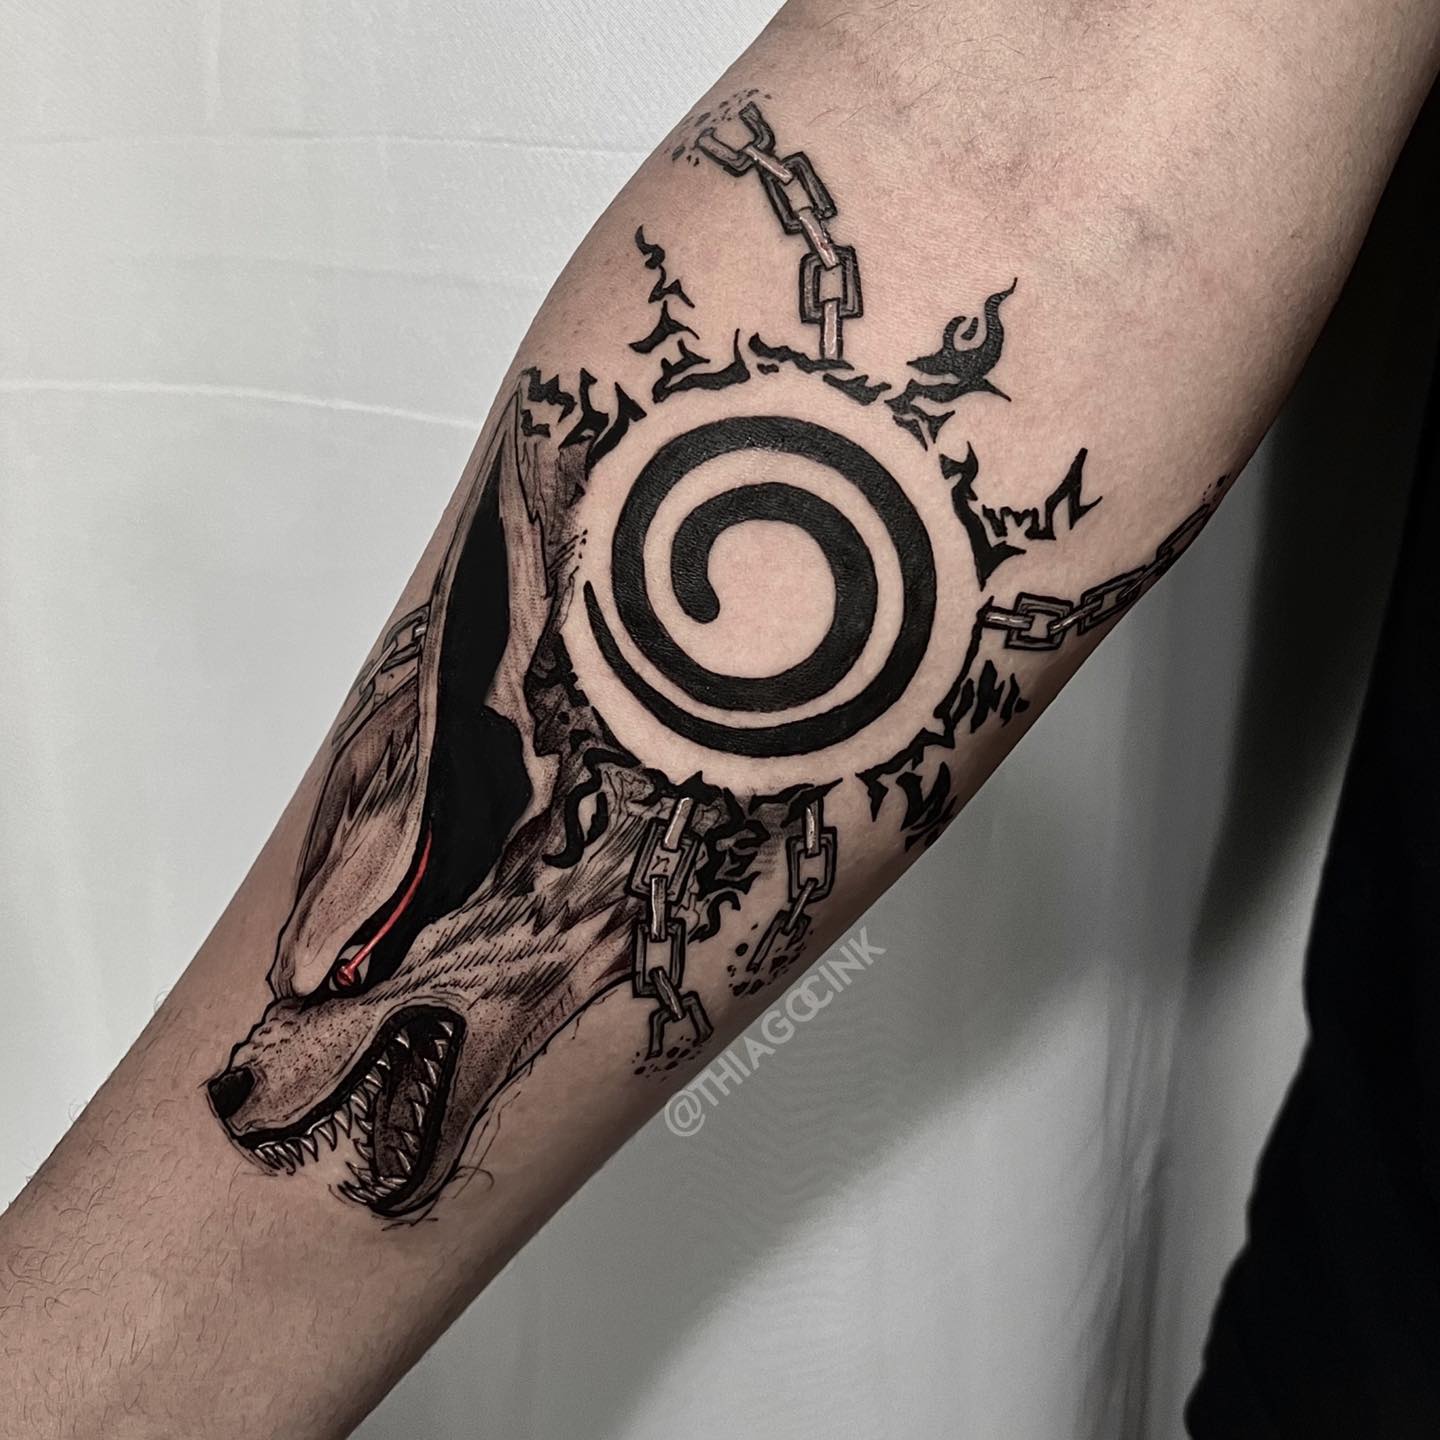 Tattoo uploaded by Richie Russell  Jiraiya Gamabunta Naruto and Pain dome  by Crush Captain in Ft Myers  Tattoodo